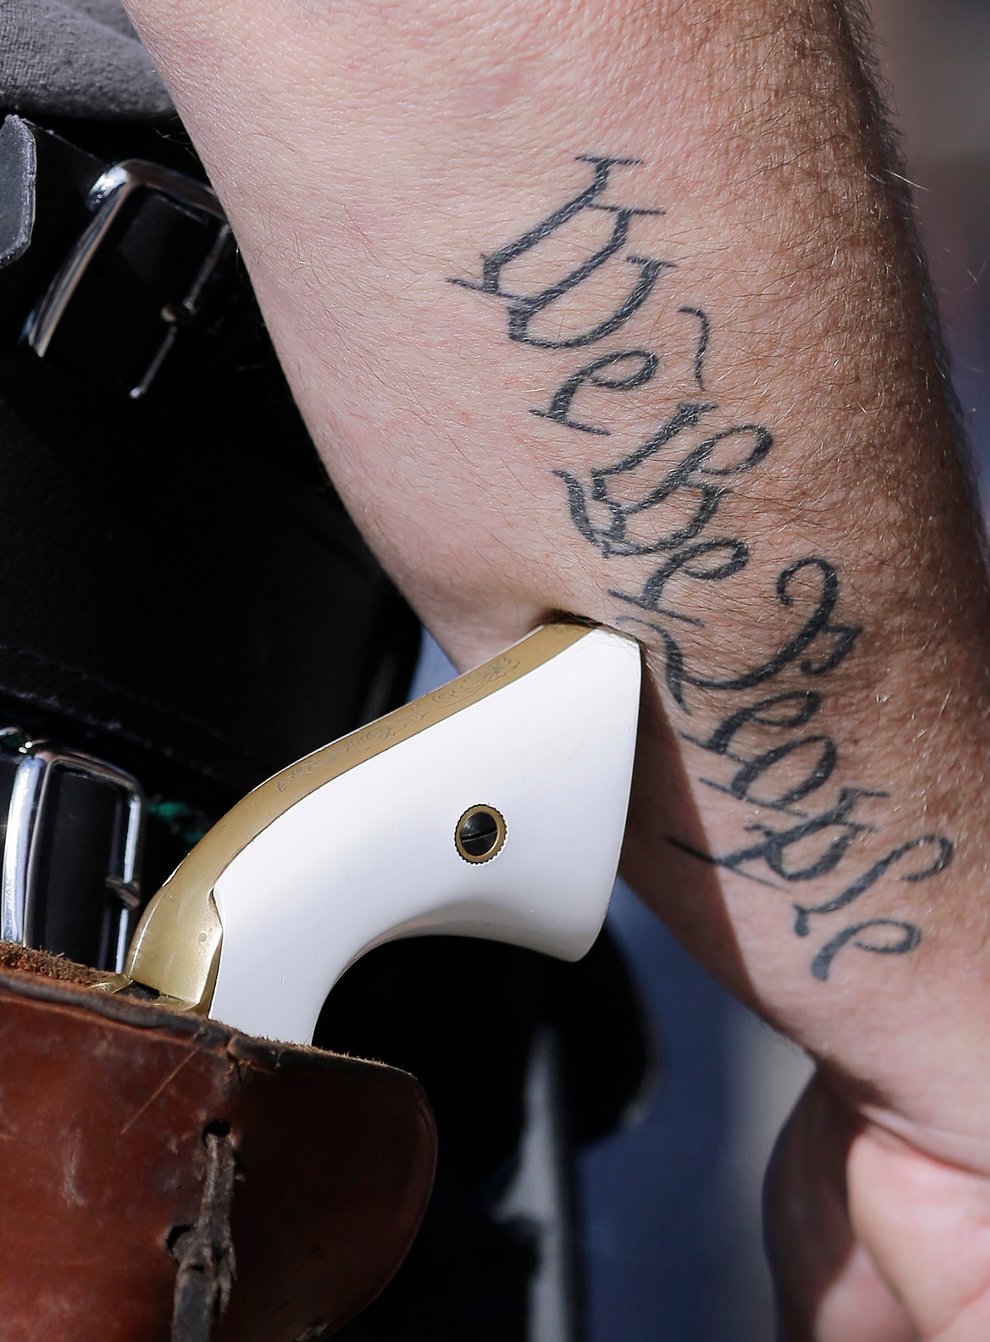 A photo of a handgun on the hip of a supporter of open carry gun laws at a rally in Austin